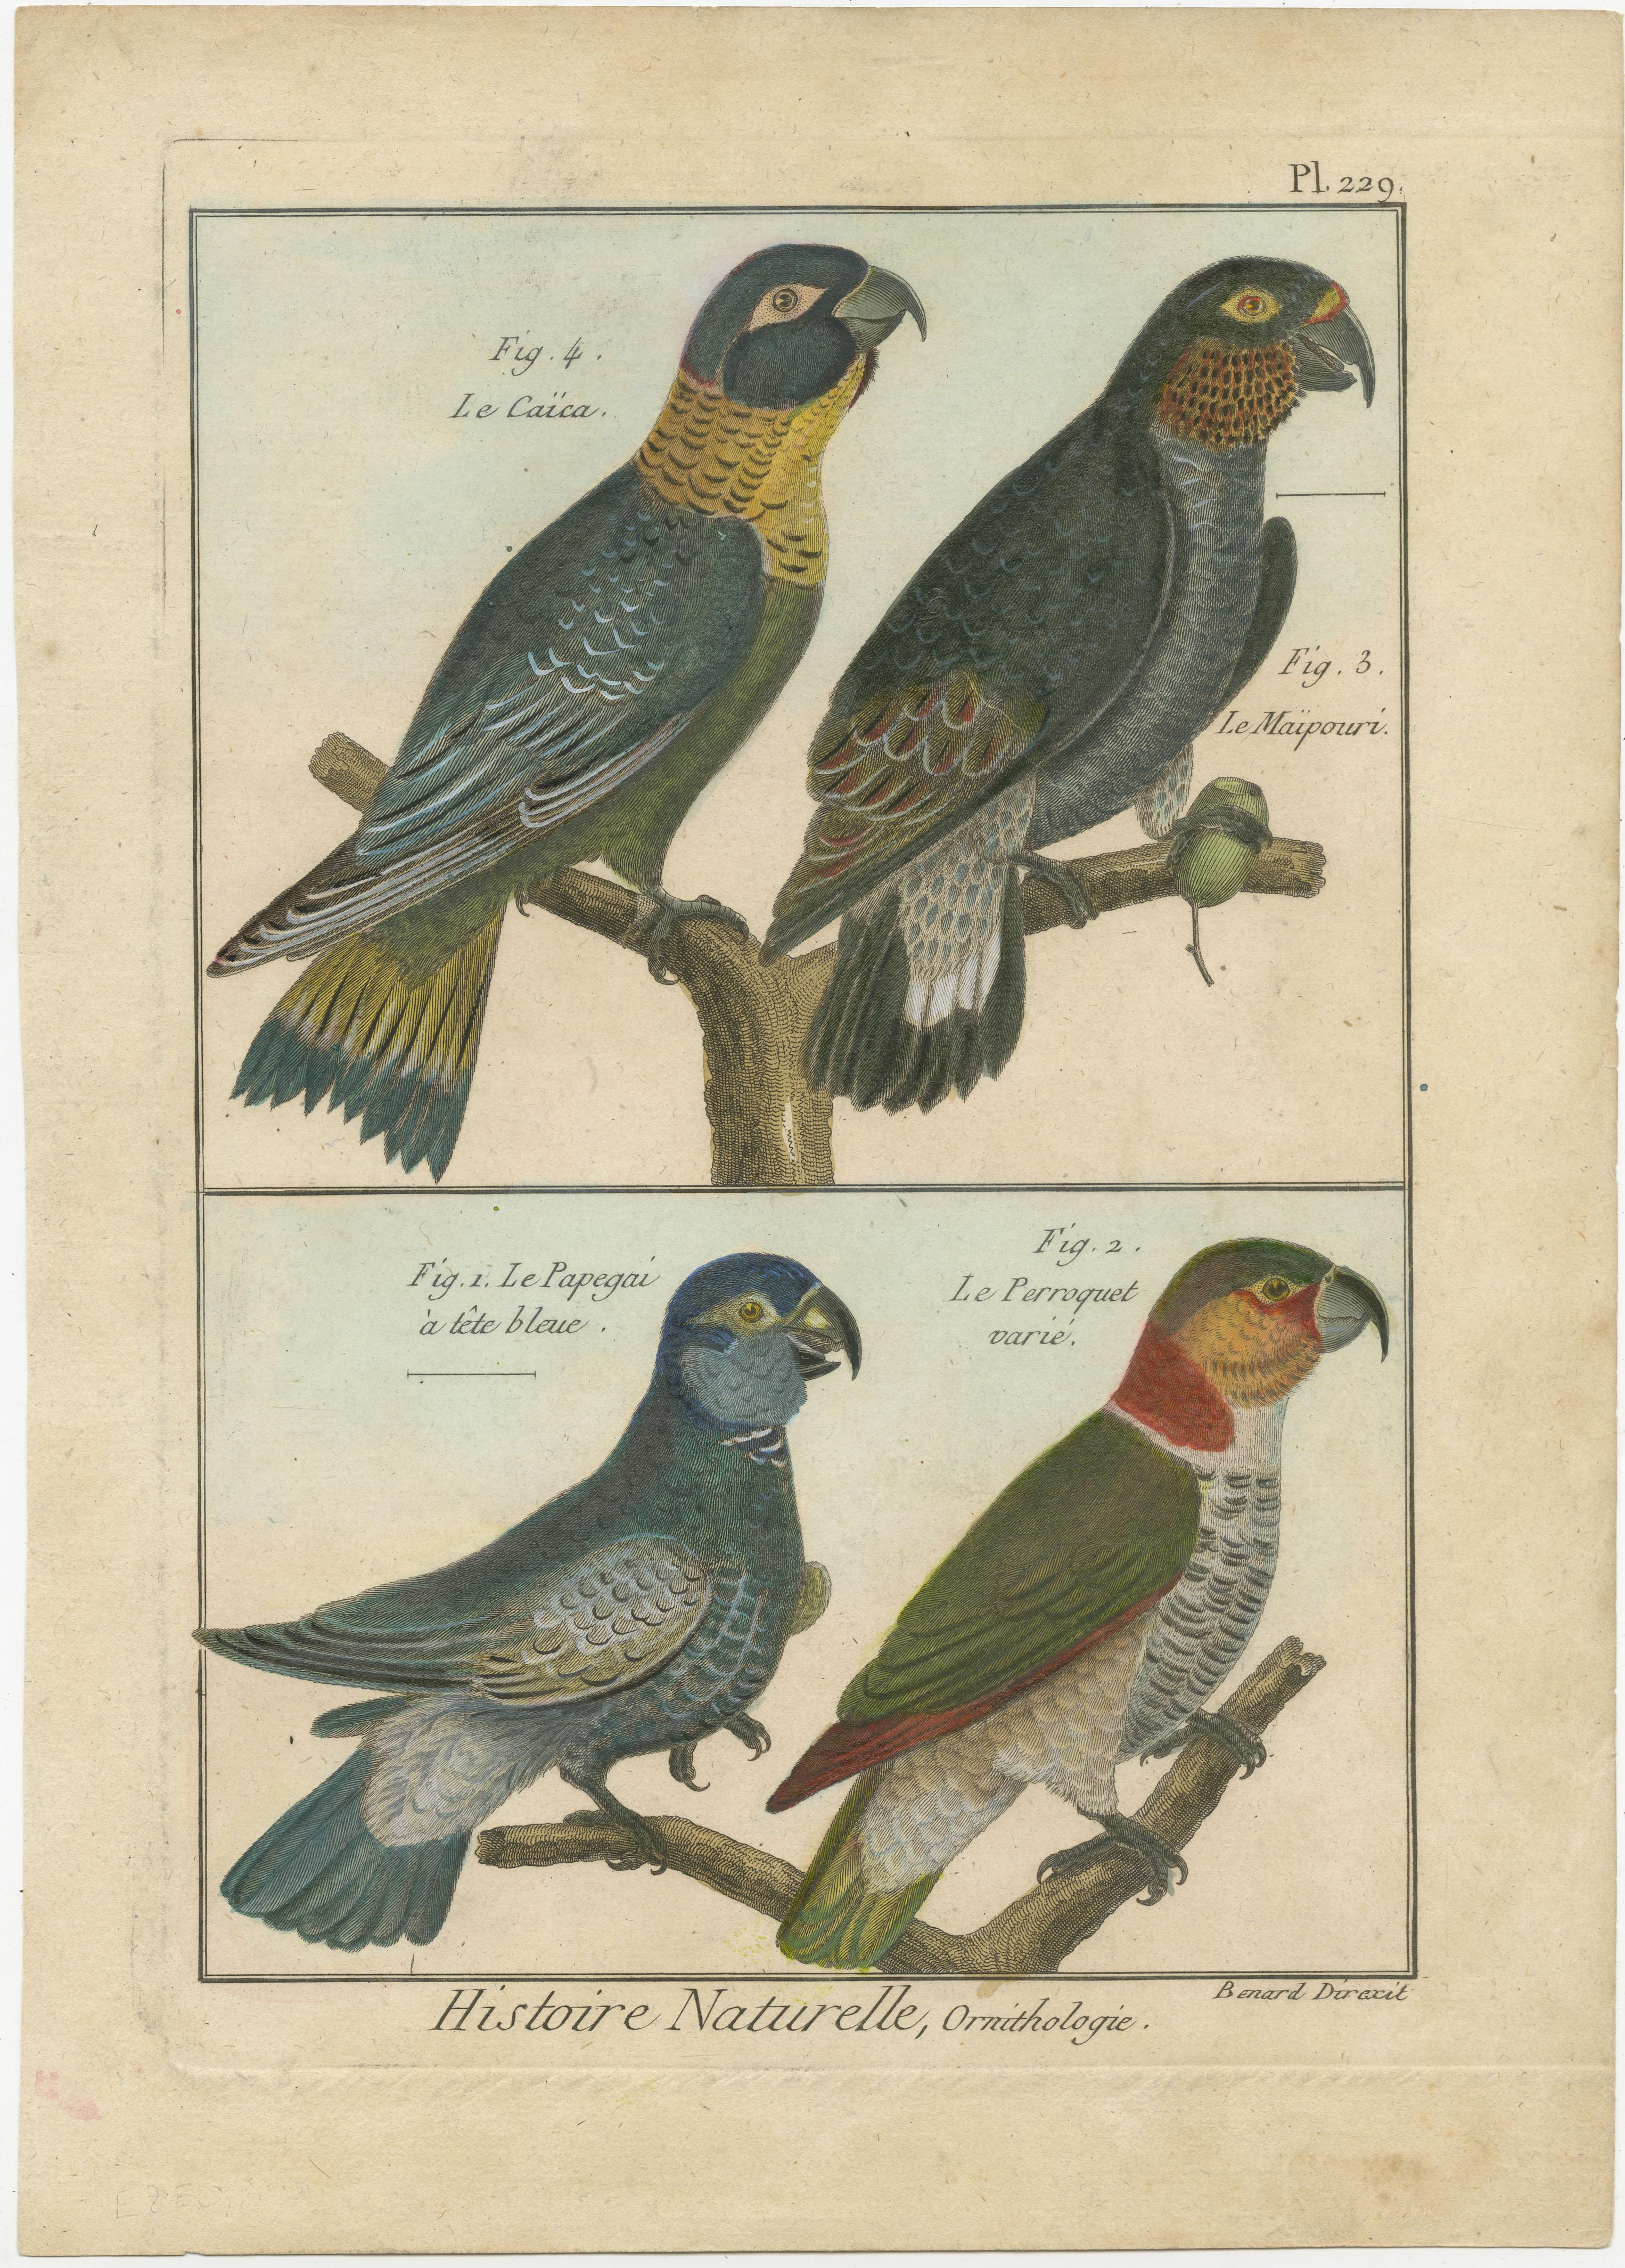 An authentic, perfect and bright, originally hand-colored, illustration of 4 Parrots, on parchment paper (copper engraving). It has a fine shining because of the authenticly applied egg-yolk as varnish. The Artist is Robert Bernard (1792). The